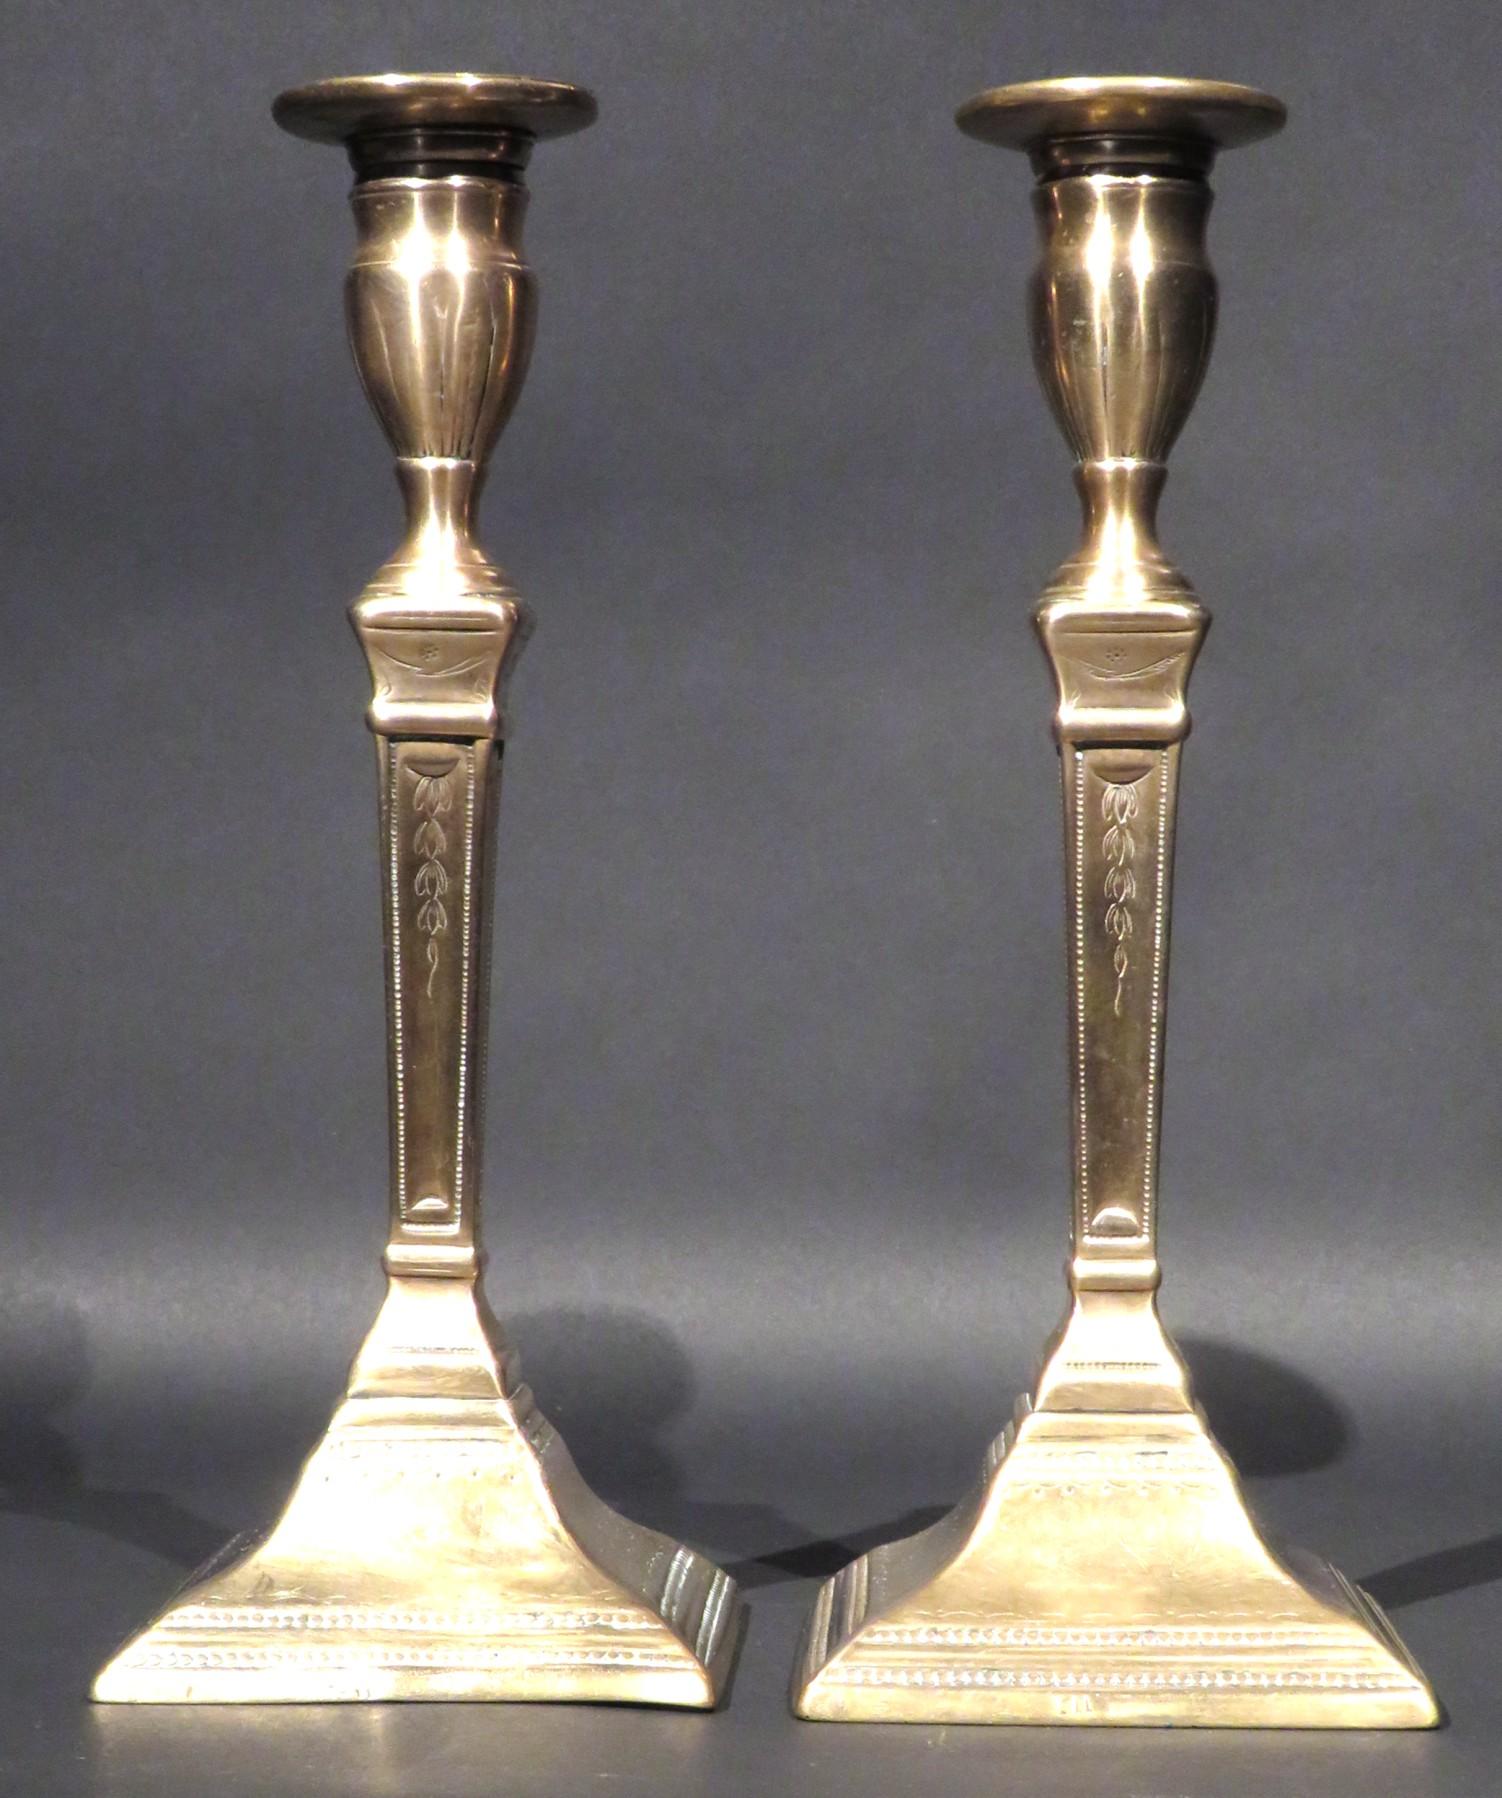 A very rare pair of 18th century neoclassical bell-metal candlesticks fitted with a unique candle gripping mechanism developed & patented by James Tate of Birmingham in 1775. Both showing flaring squared columns with hand embossed honeysuckle